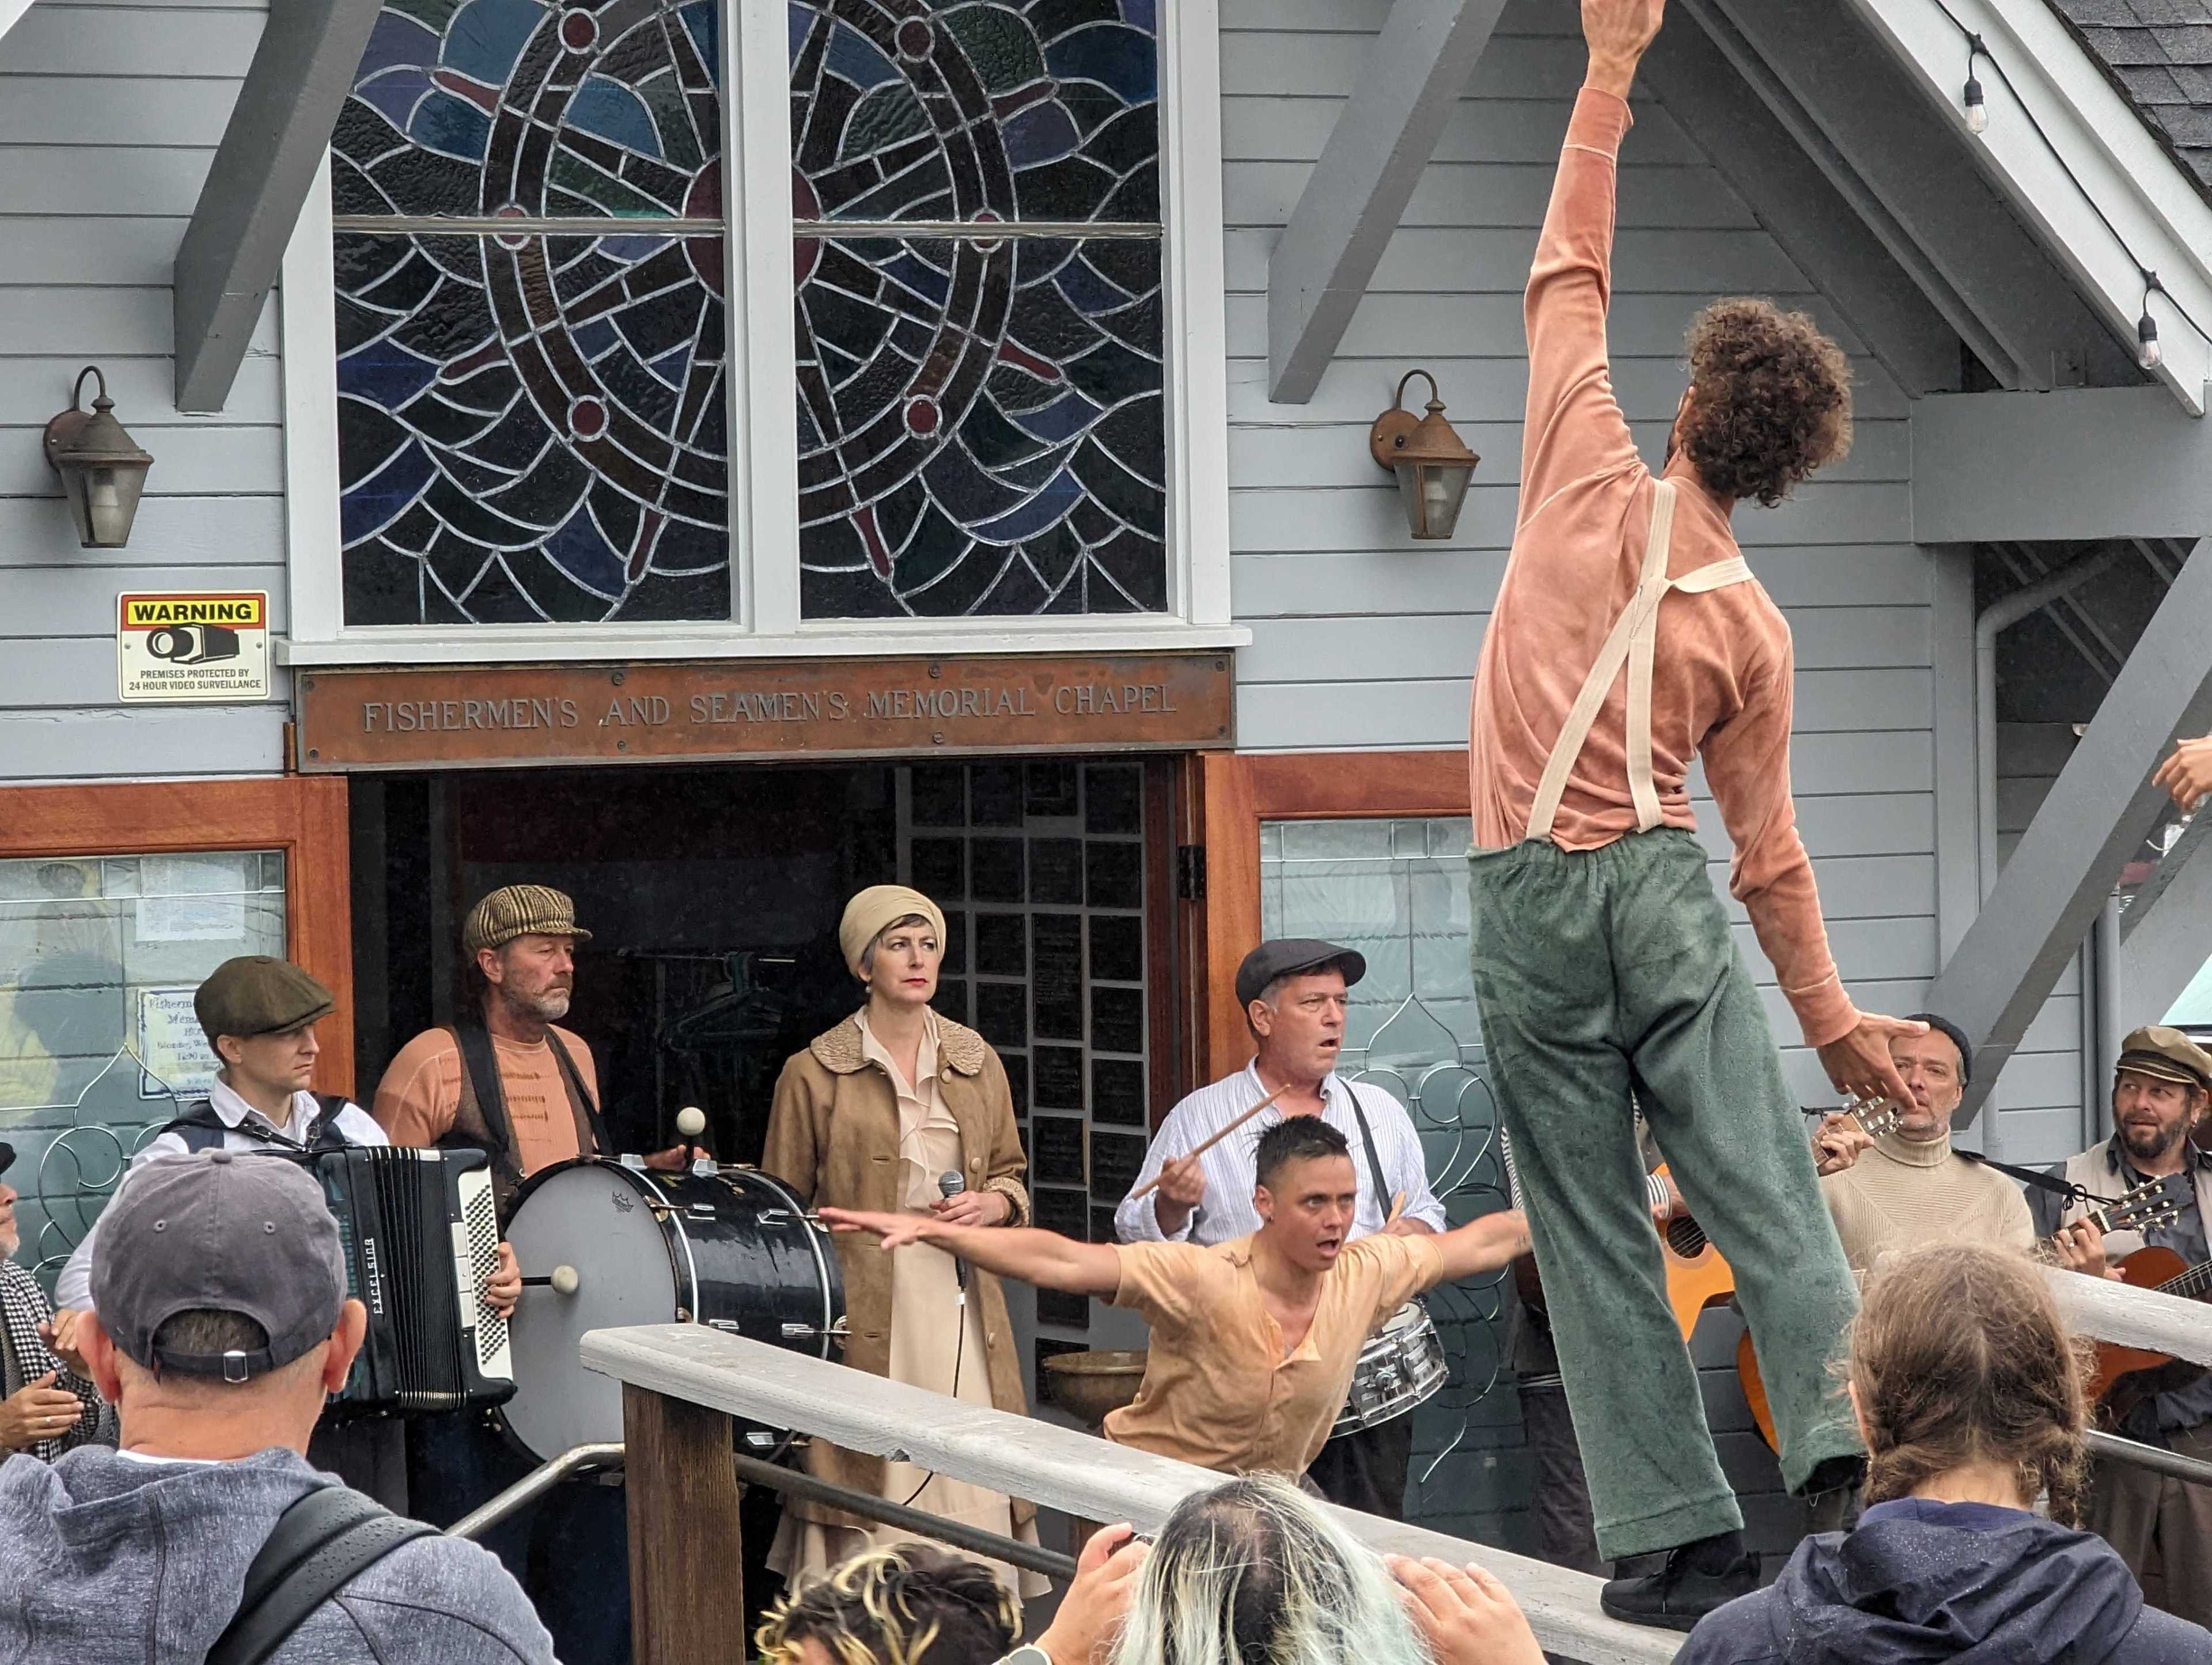 Epiphany Dance Theater members perform with Jonah's Lift outside the Fishermen's and Seamen's Chapel at Fishermen's Wharf for the San Francisco Trolley Dances festival on Sunday, October 22, 2023. Epiphany’s San Francisco Trolley Dances (SFTD) is an annual festival presented over 3 days along a designated public transit route. SFTD connects neighborhoods and participants to San Francisco’s history, culture, architecture, natural environment and social fabric.